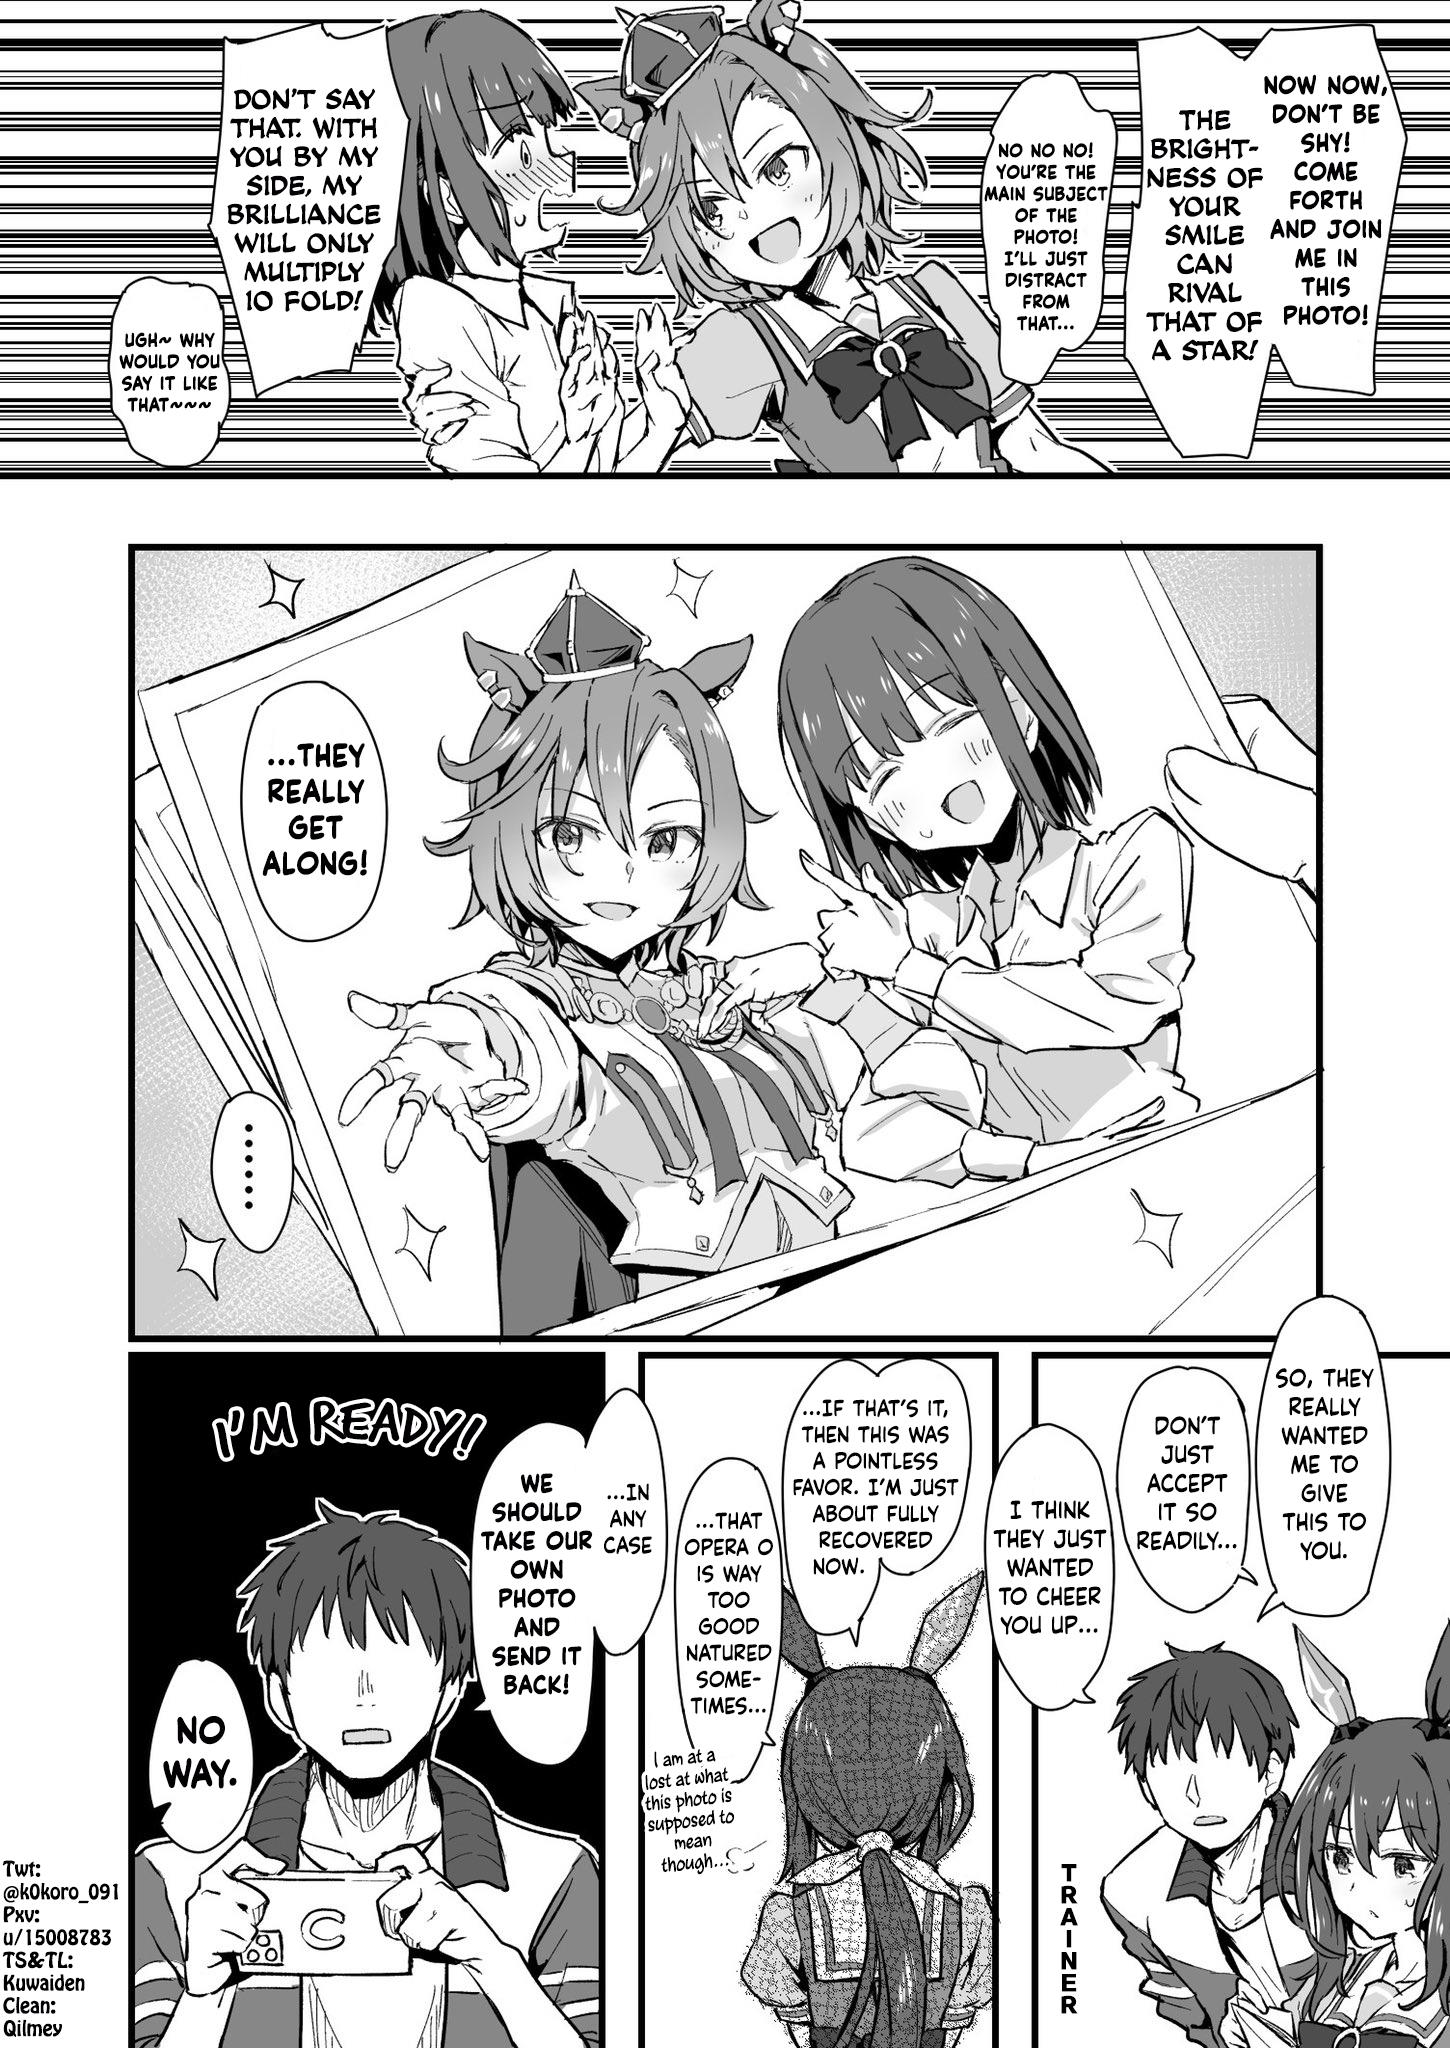 Kokoro-Sensei's Umamusume Shorts (Doujinshi) Chapter 7: Opera, Her Trainer, Ayabe, And Her Competitive Trainer - Picture 2